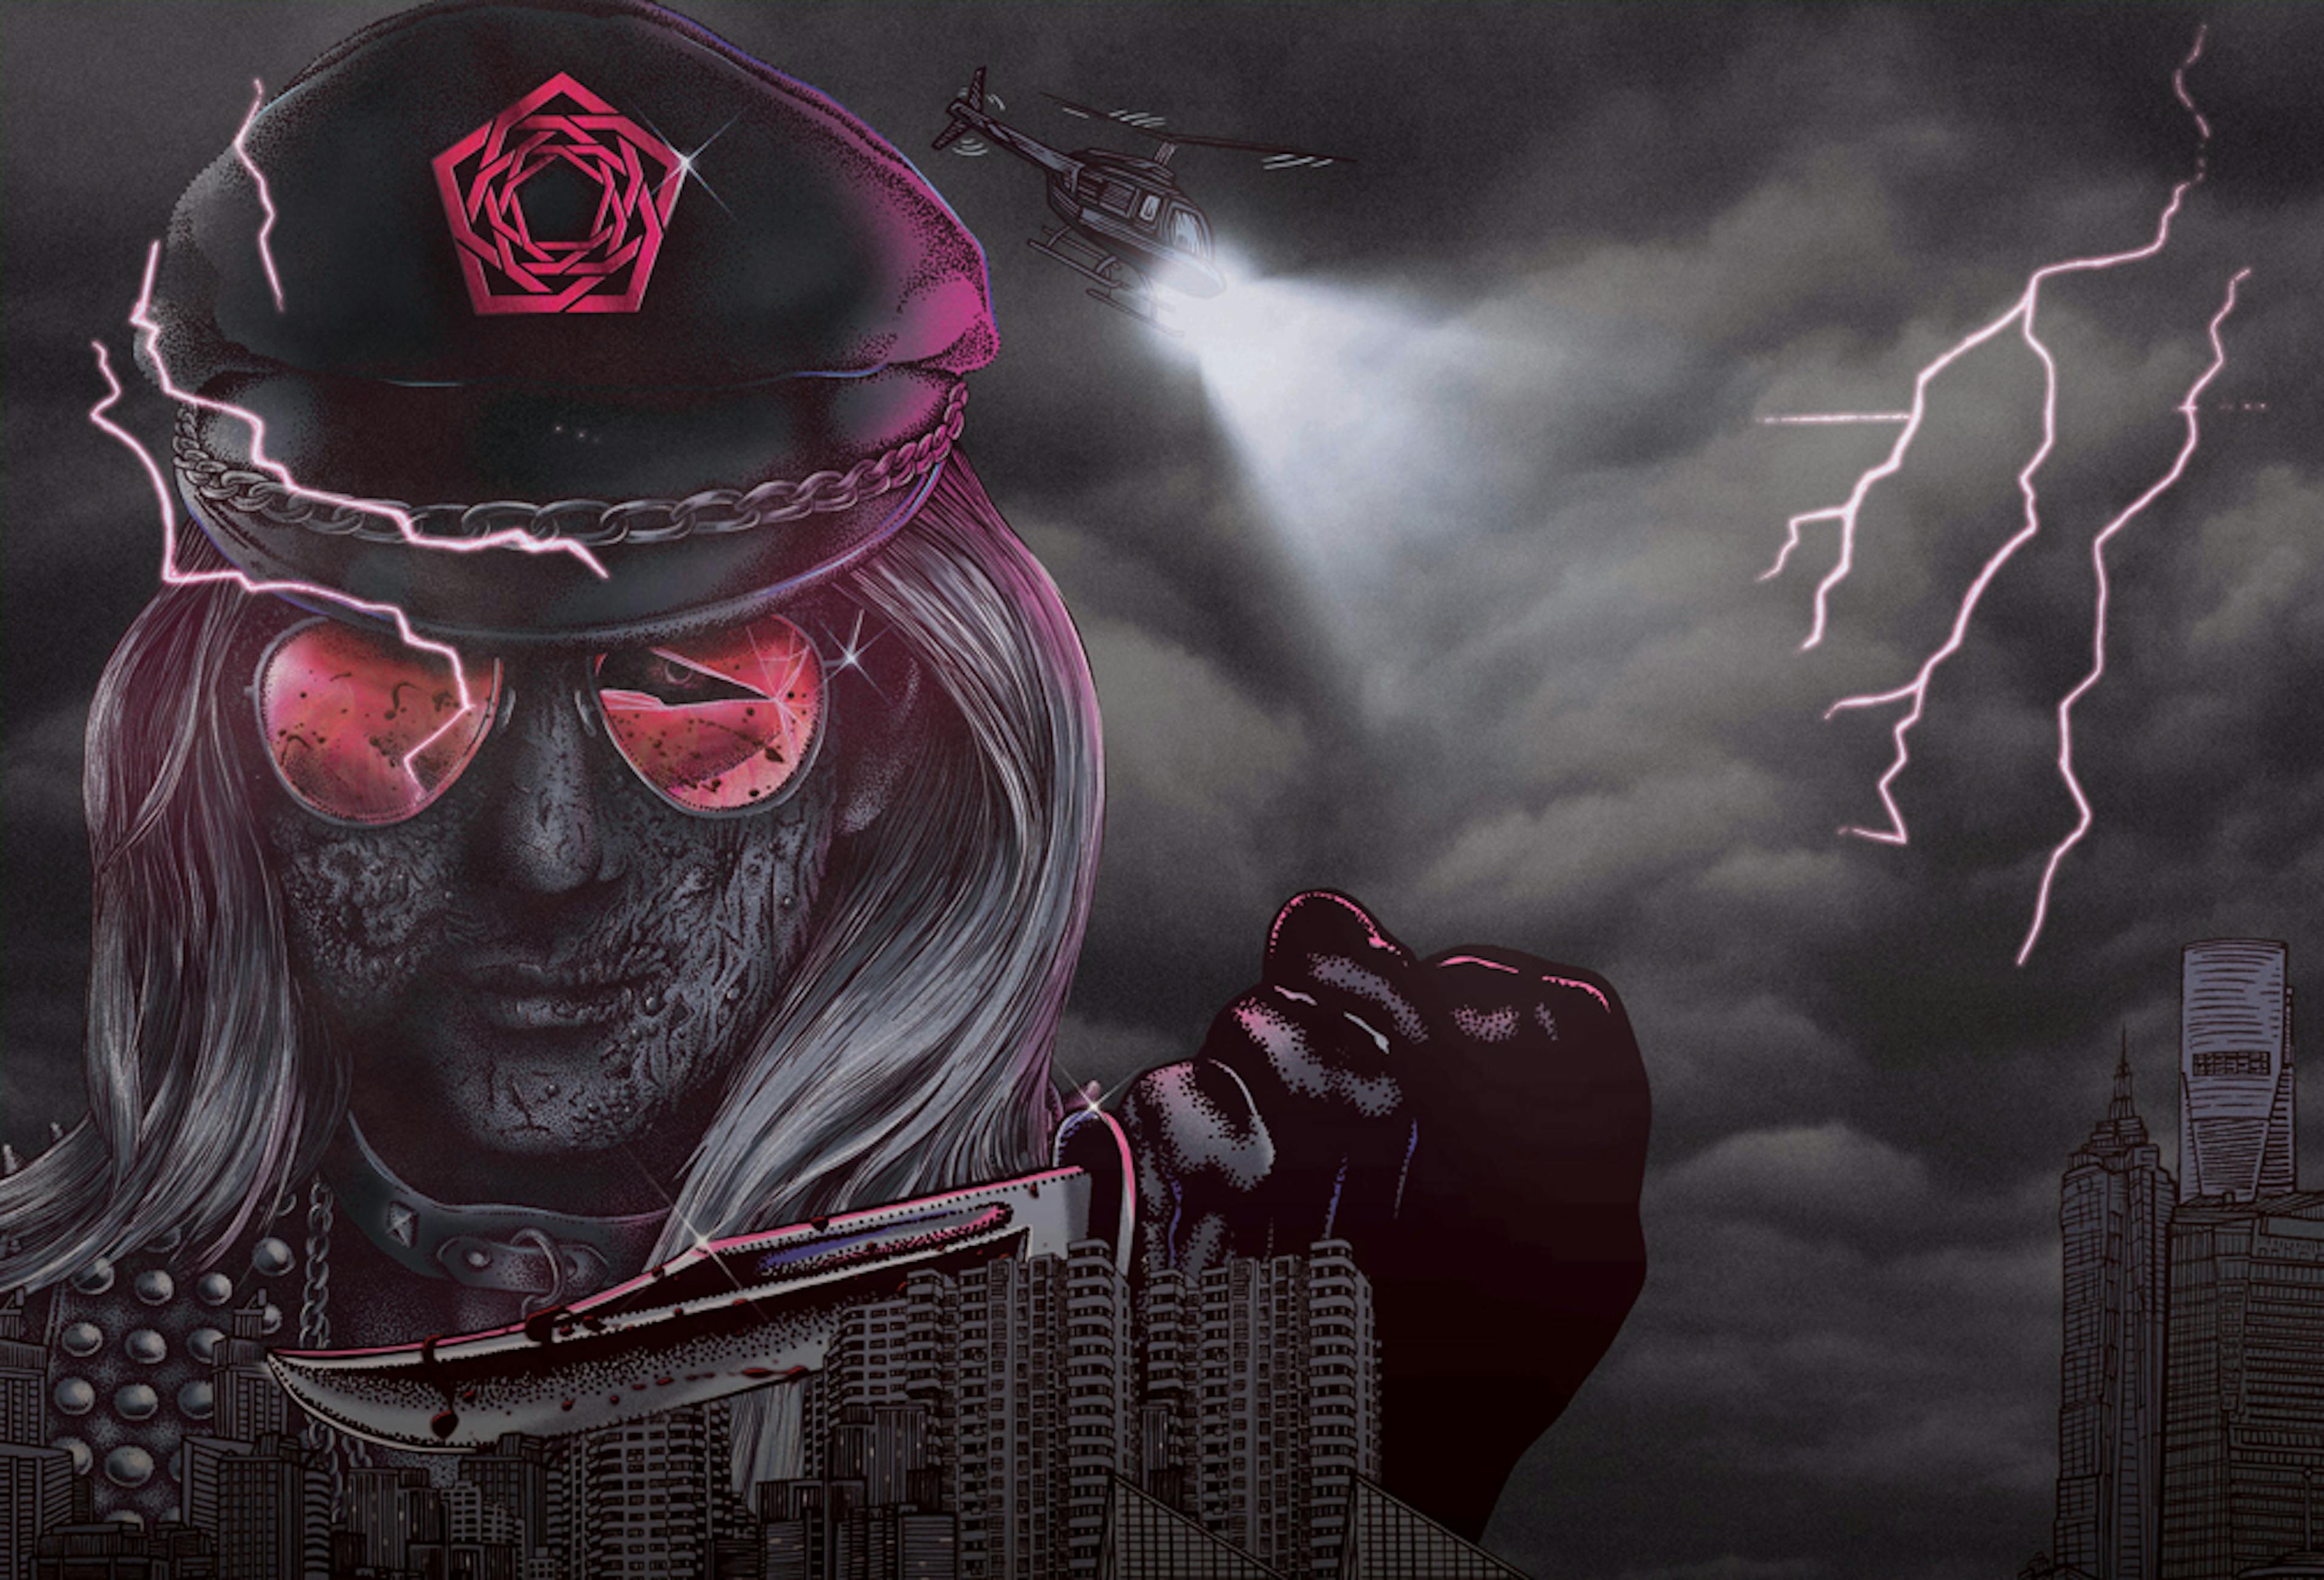 How Carpenter Brut are revolutionising heavy music at the forefront of the synthwave insurgency